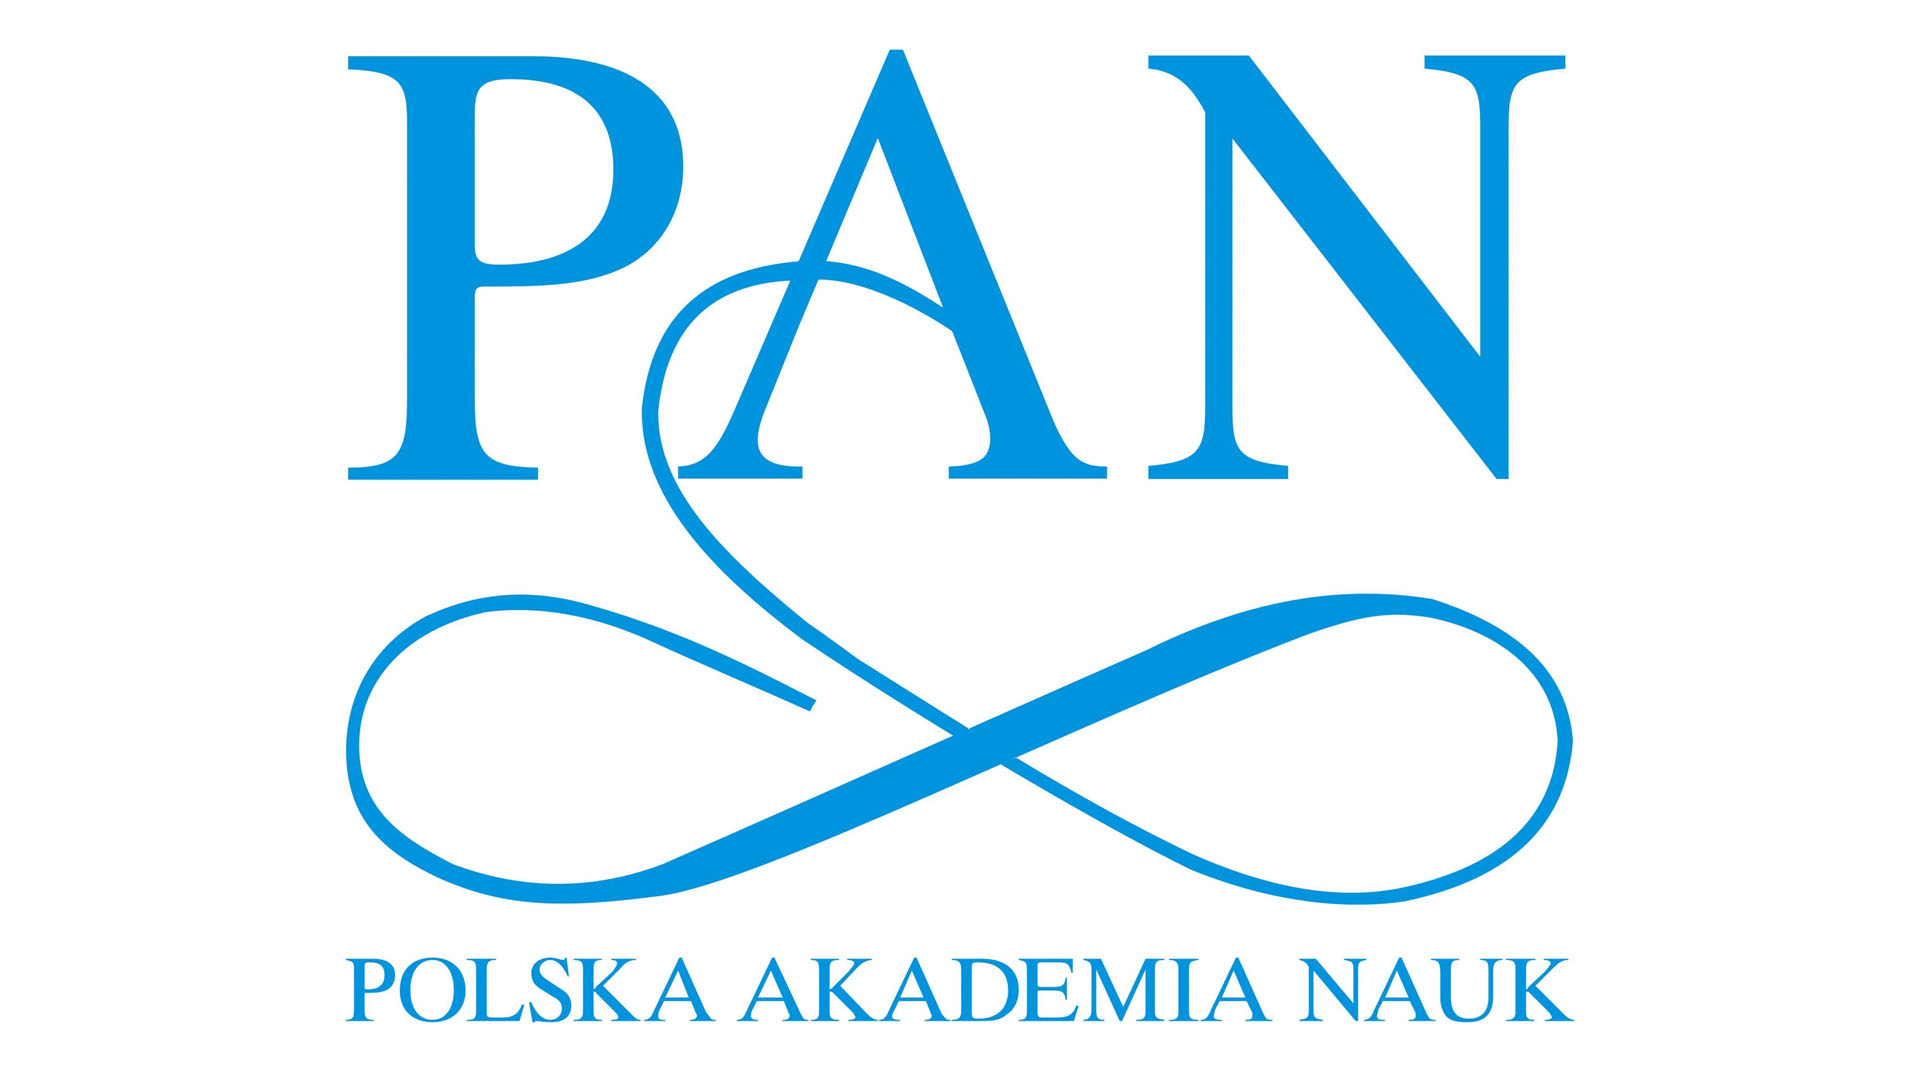 Meet with genetics in the Science Center of Polish Academy of Sciences